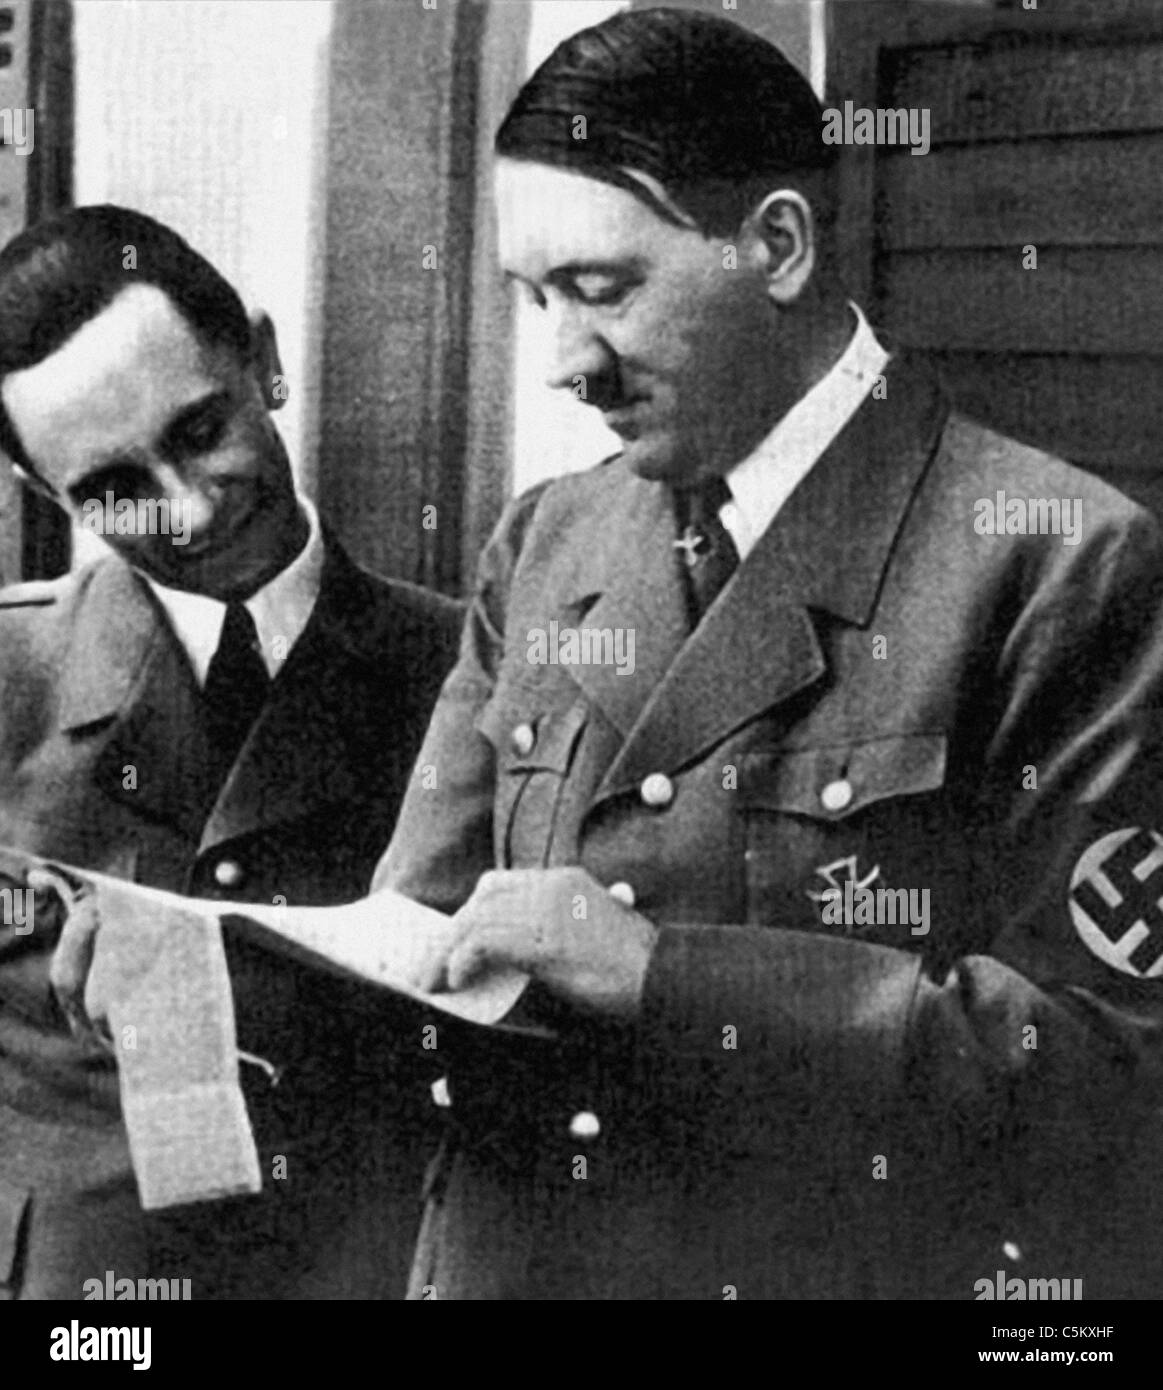 Joseph Goebbels German wartime Minister of Propaganda with Adolf Hitler from the archives of Press Portrait Service Stock Photo